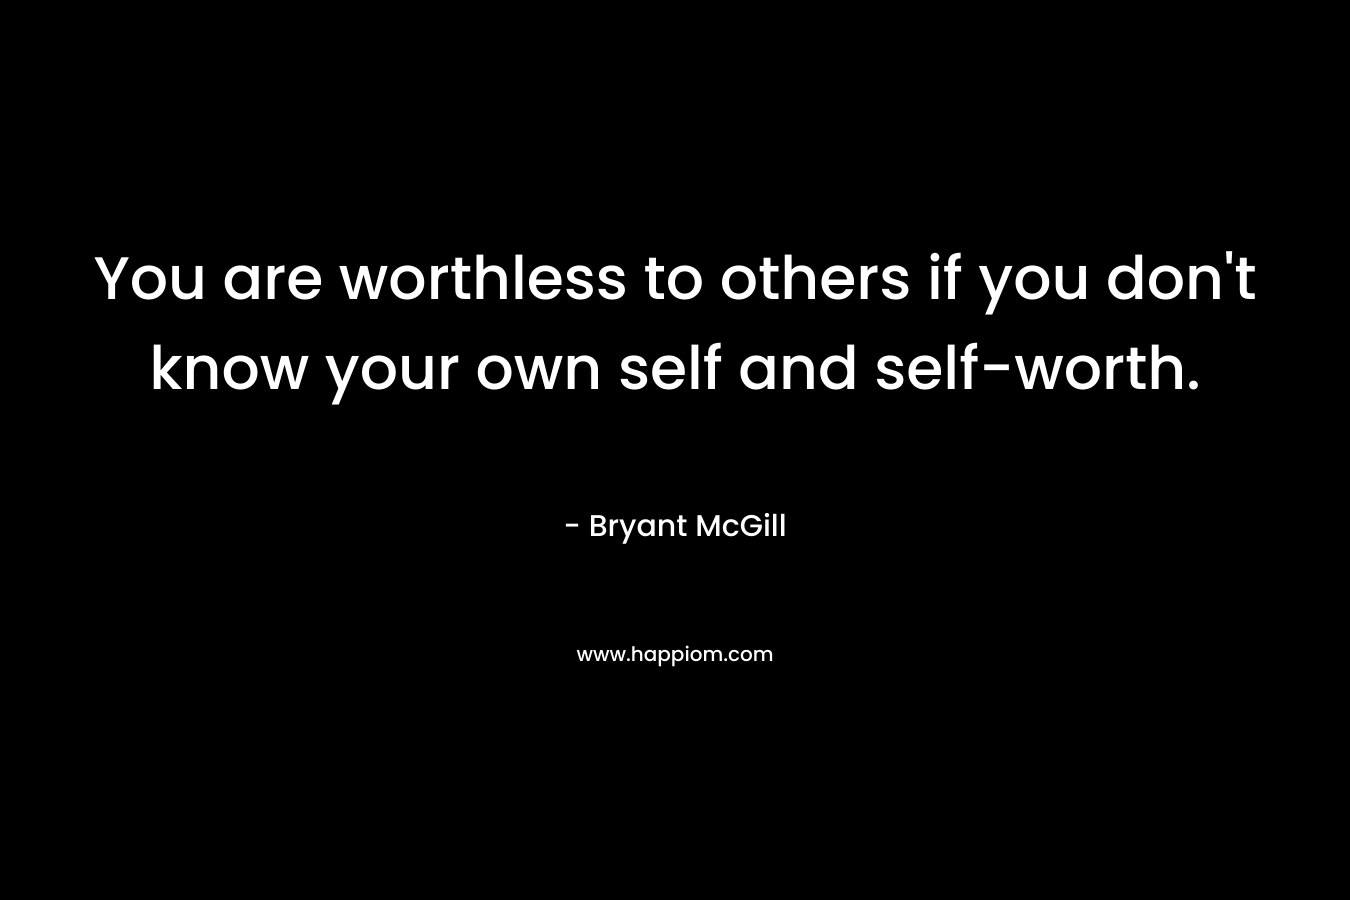 You are worthless to others if you don't know your own self and self-worth.